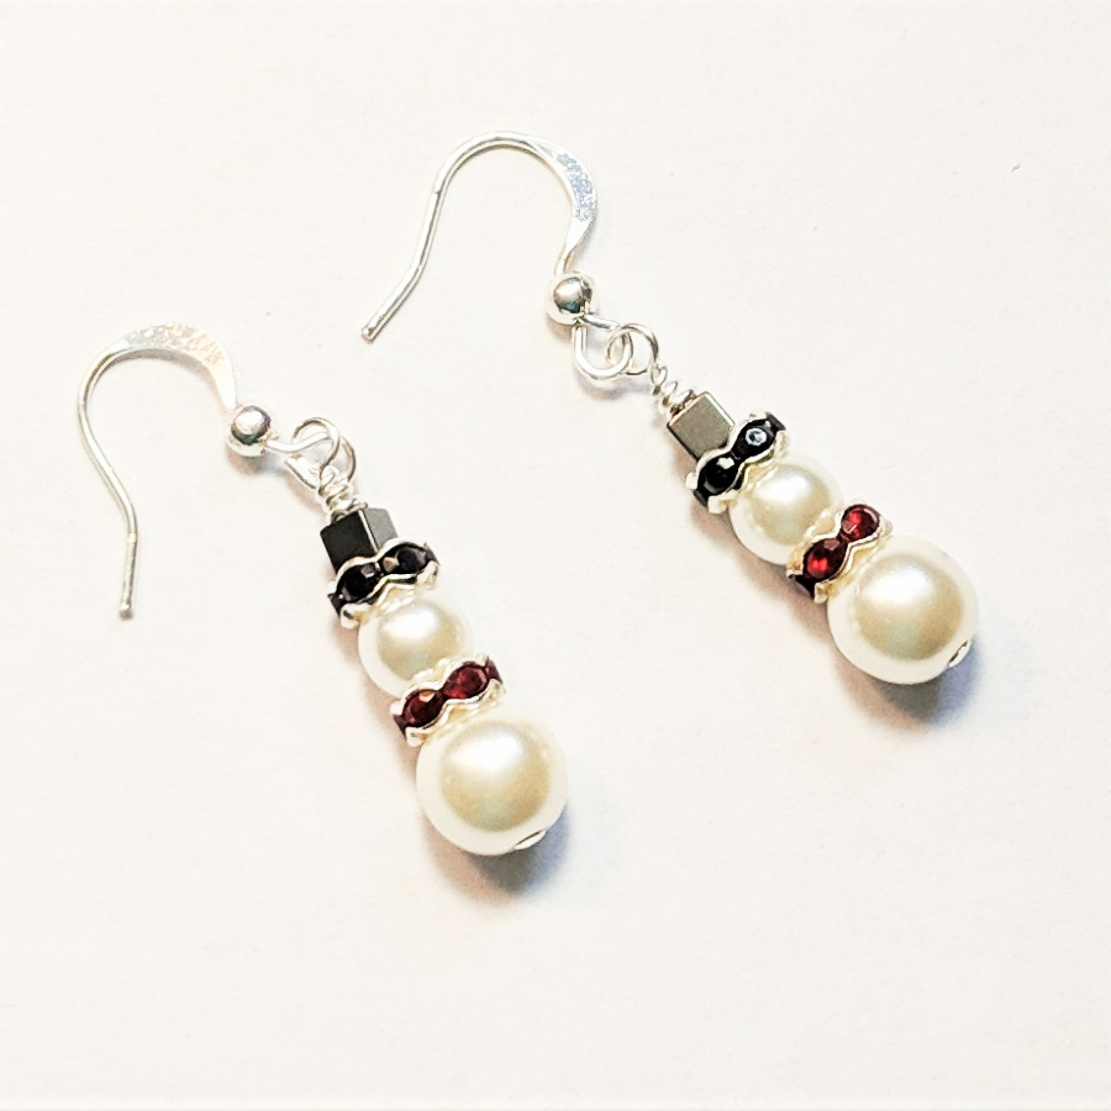 Snowman Earrings with Red Rondelle Accents - Click Image to Close